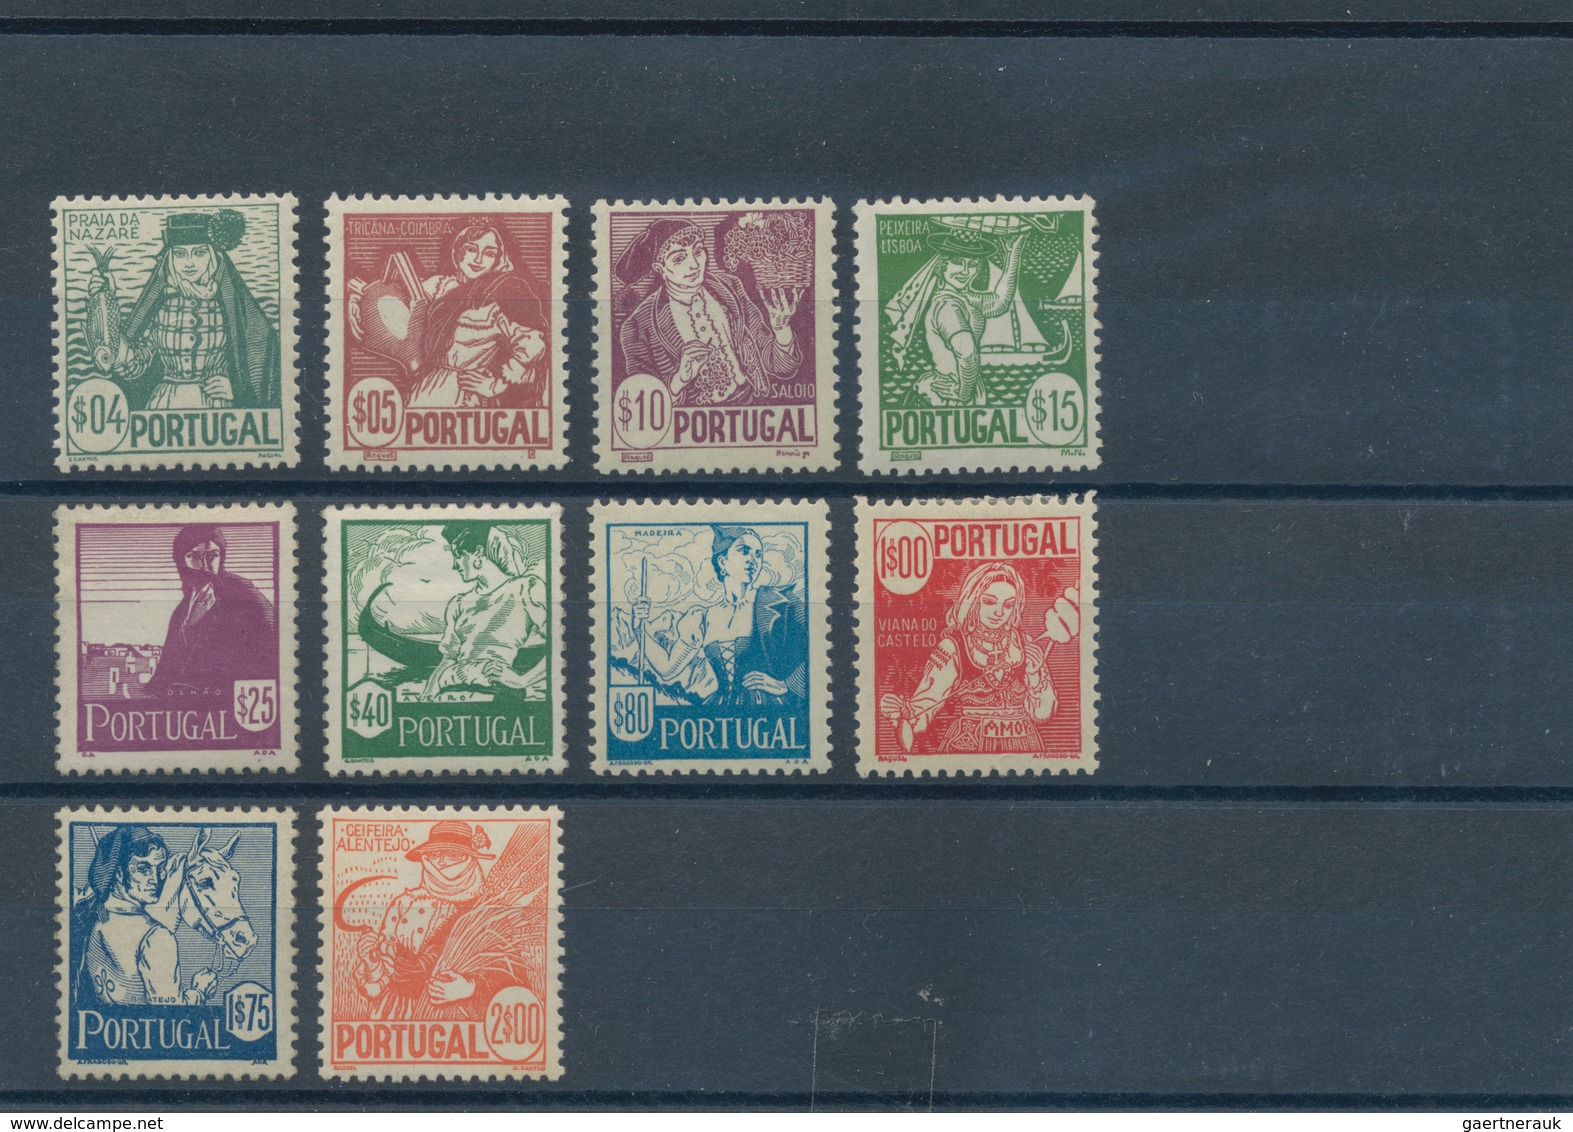 Portugal: 1940/1954, ten complete year sets without the souvenir sheets, mint never hinged, some sta